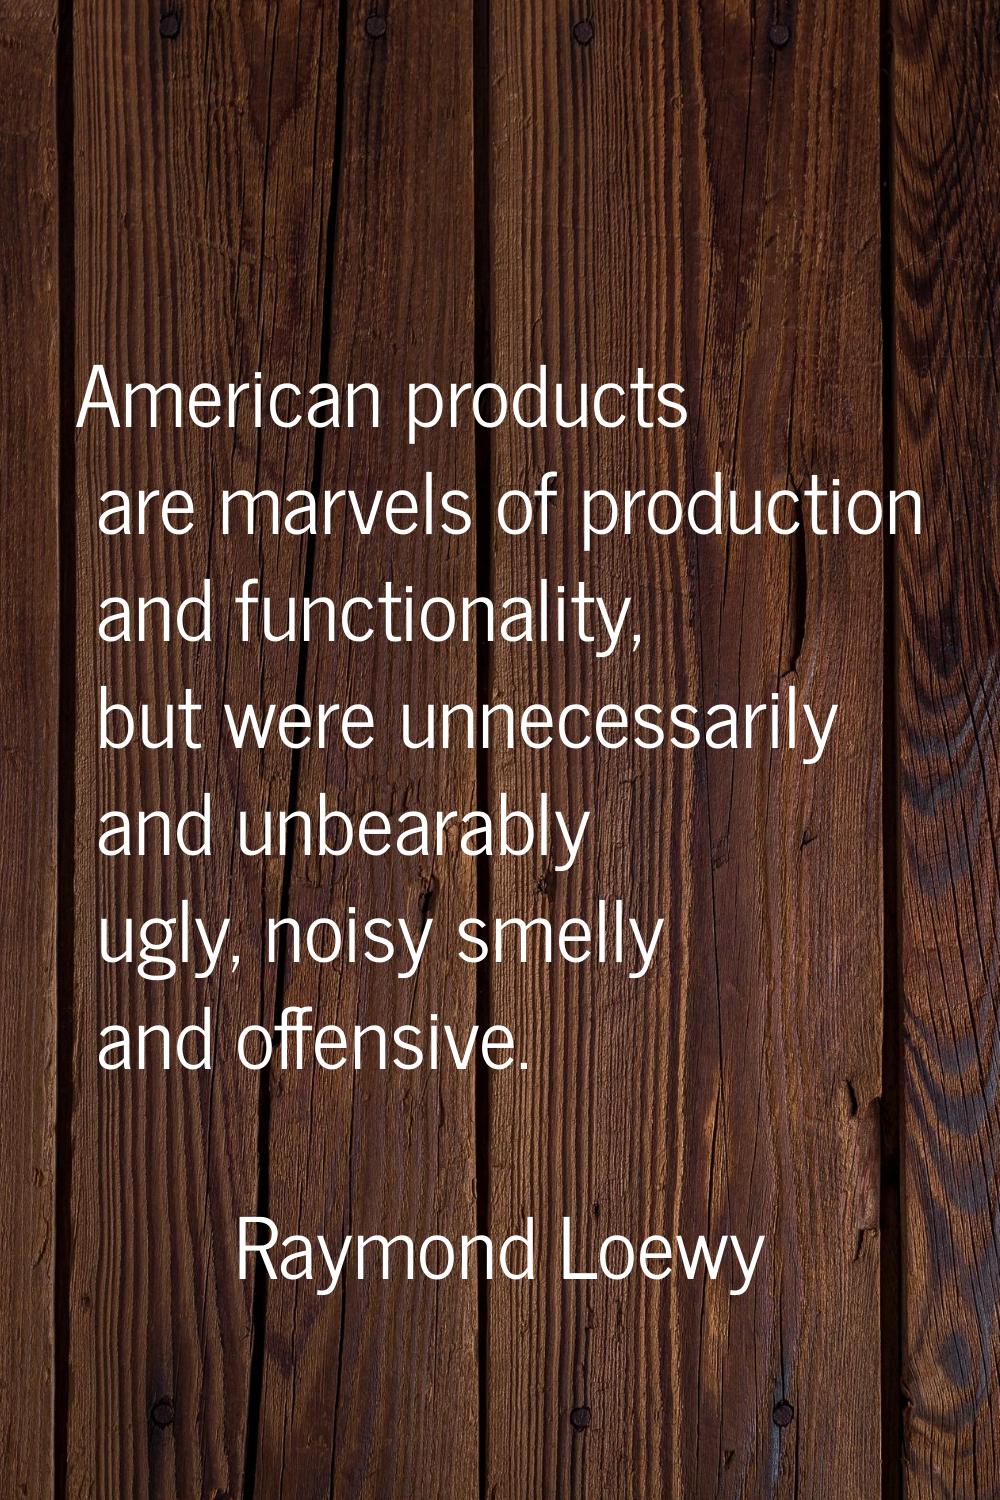 American products are marvels of production and functionality, but were unnecessarily and unbearabl